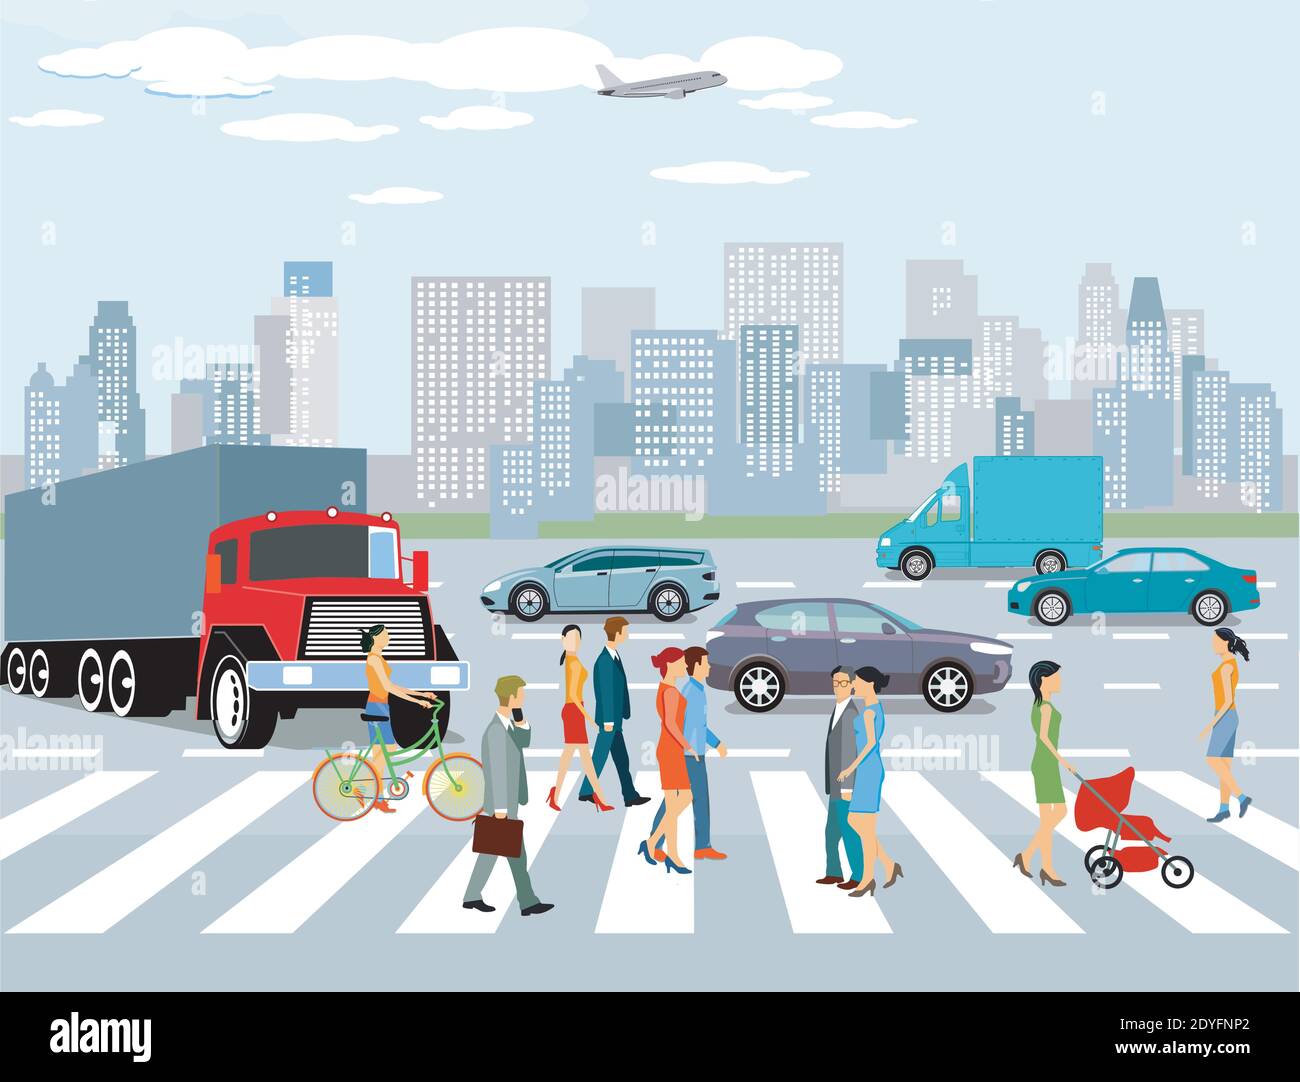 City with road traffic, apartment buildings and pedestrians on the crosswalk,, illustration Stock Vector